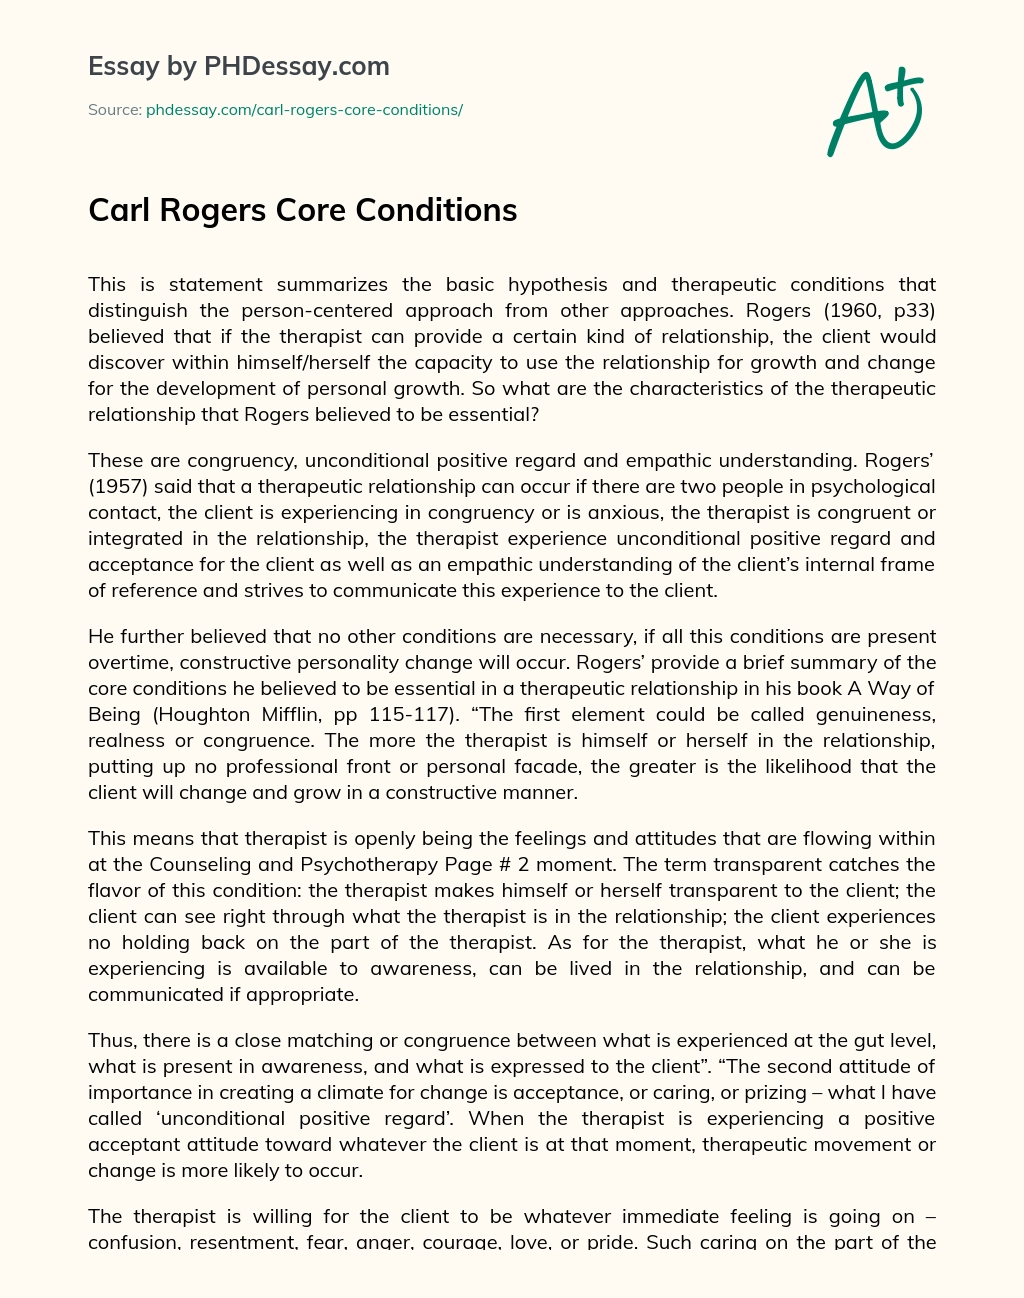 Carl Rogers Core Conditions essay